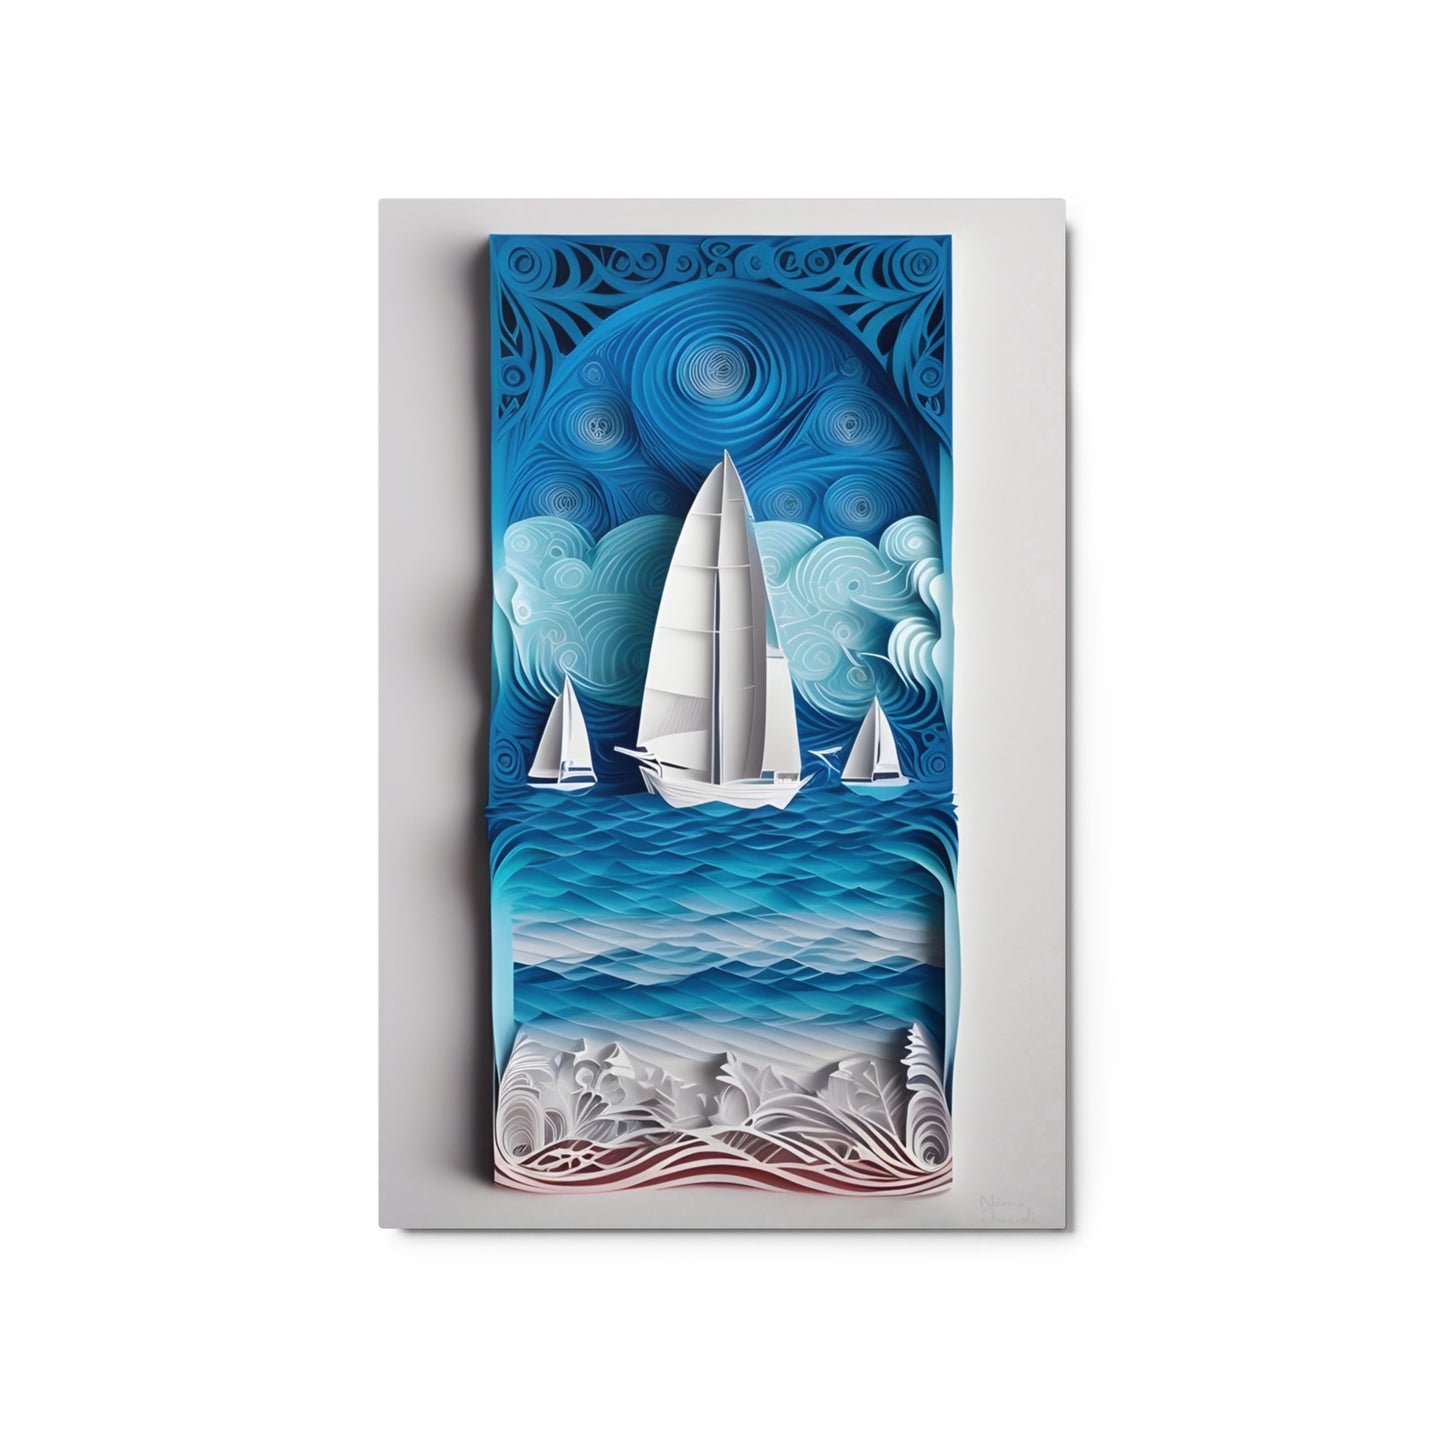 SD07: A Fine Wall Art from the 'Sea & Surf' Collection